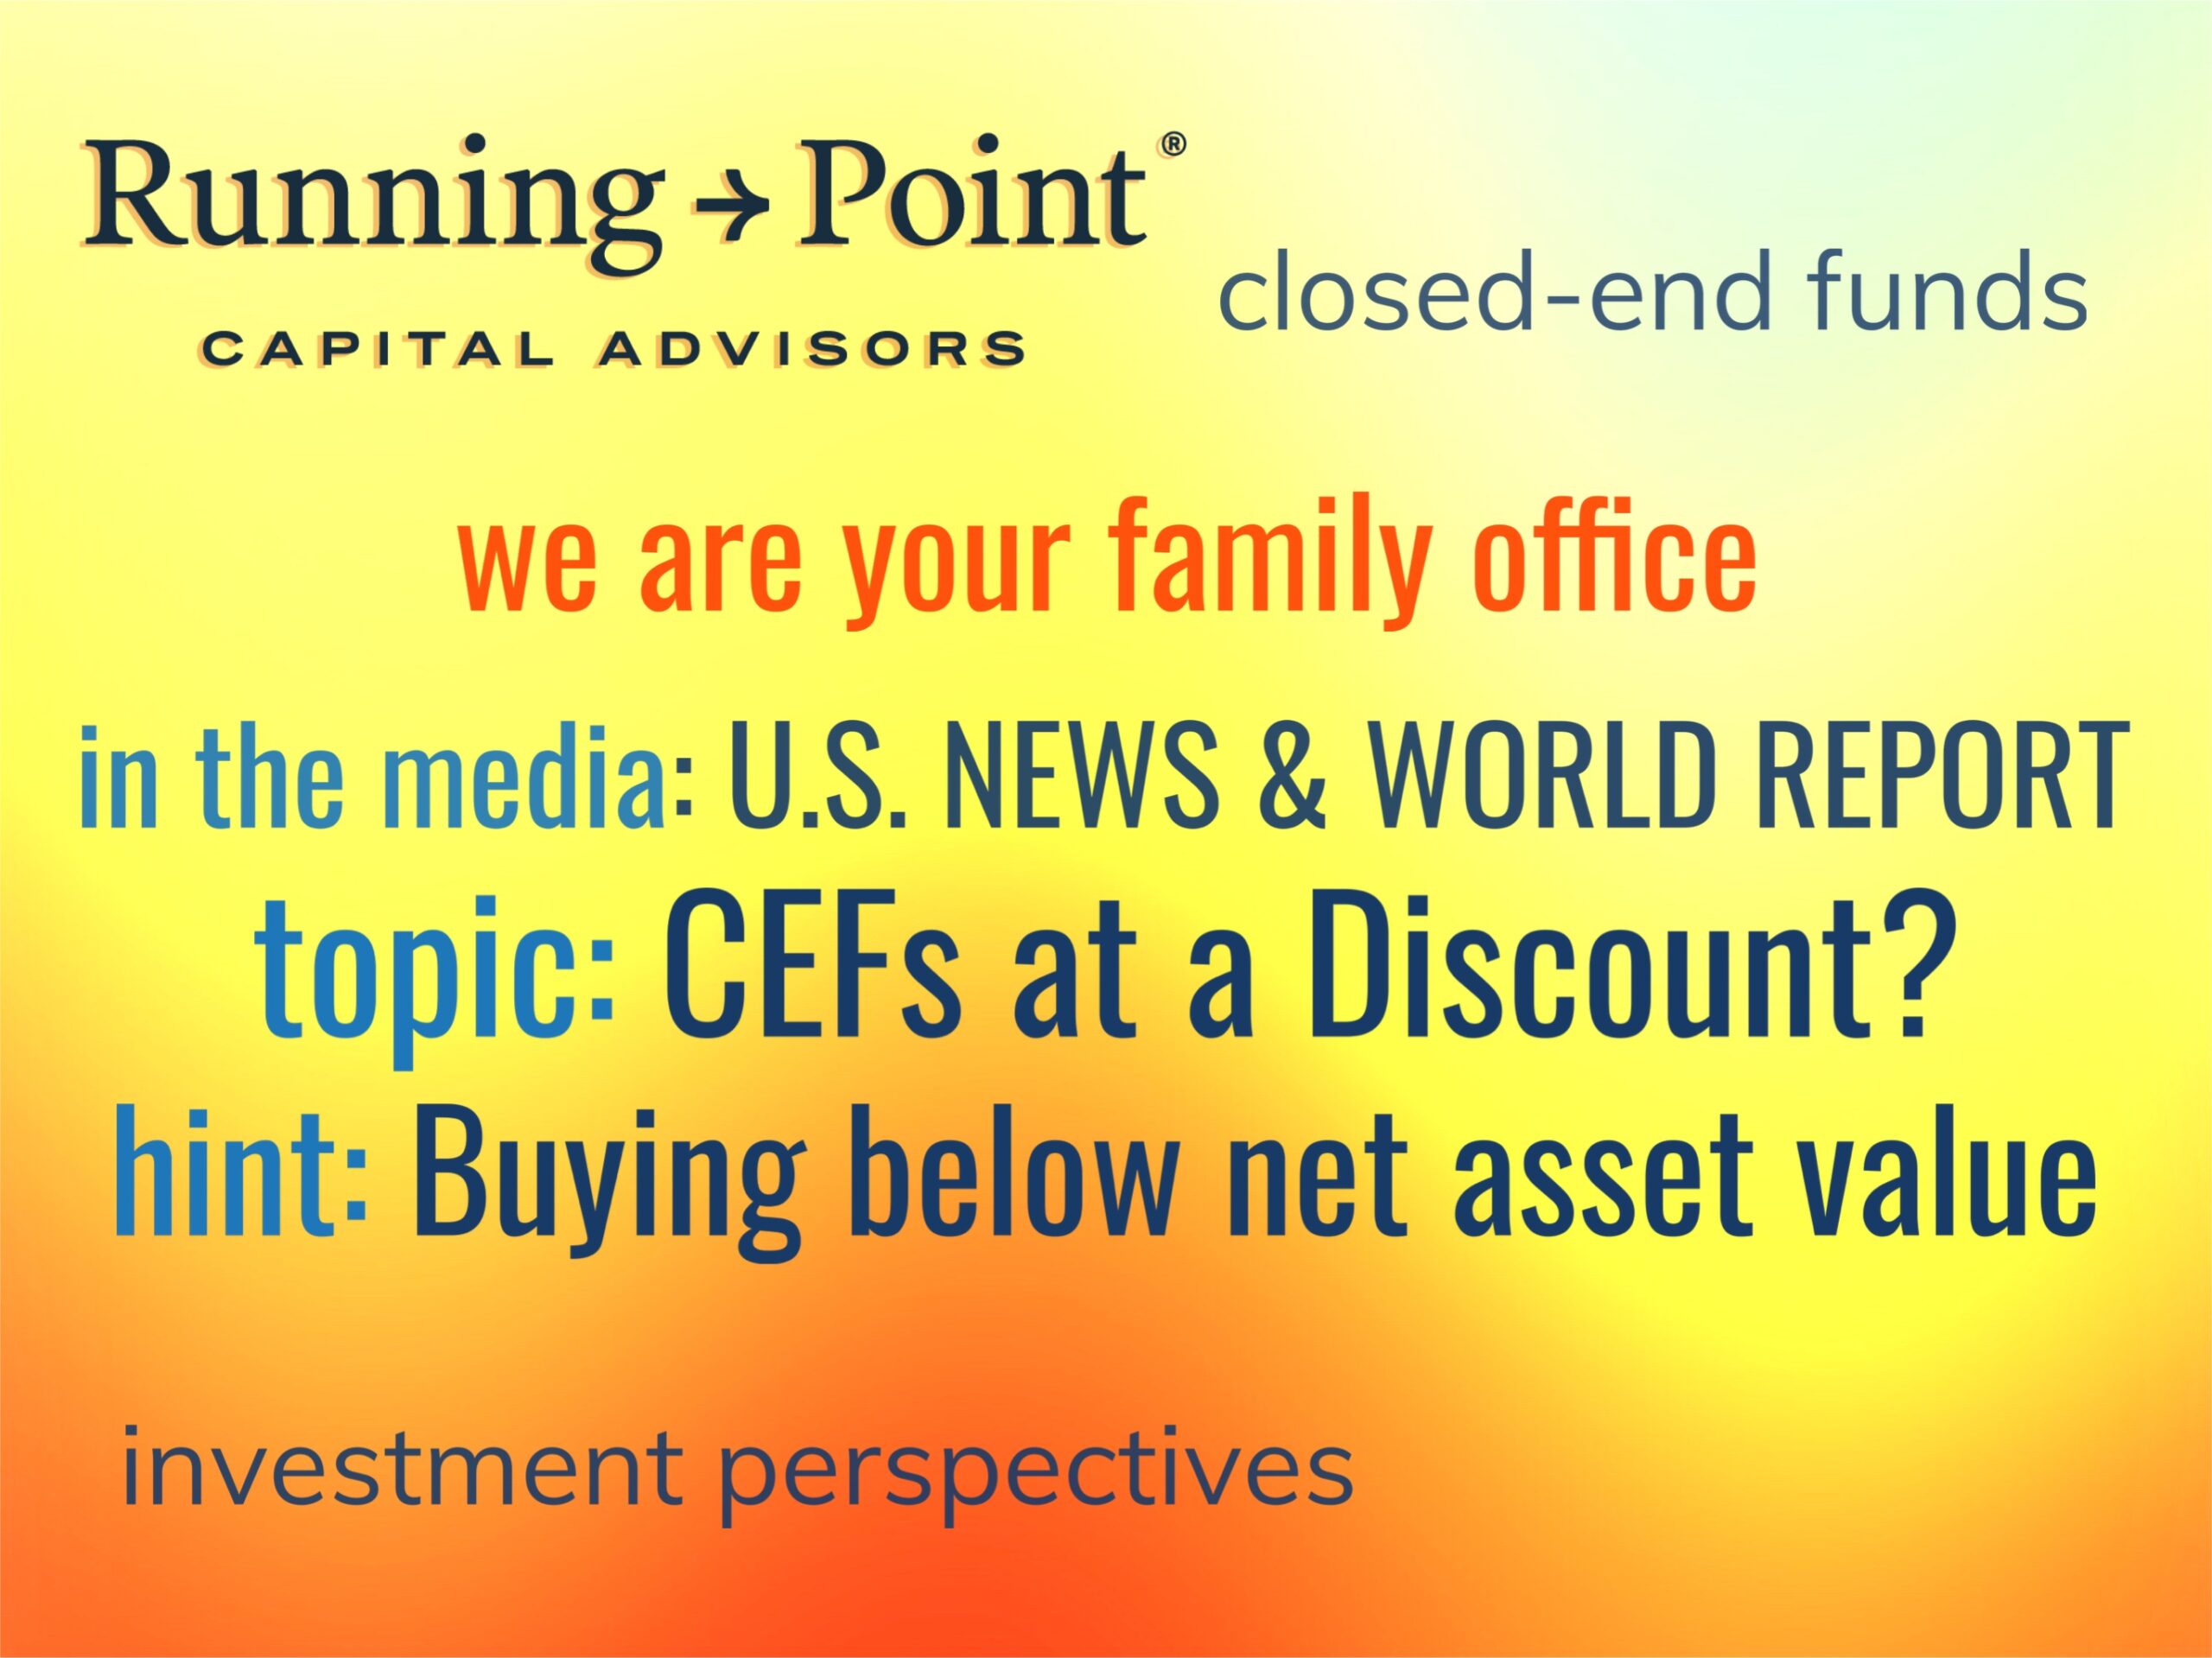 U.S. News & World Report: Funds Trading at a Discount to Their Underlying Value